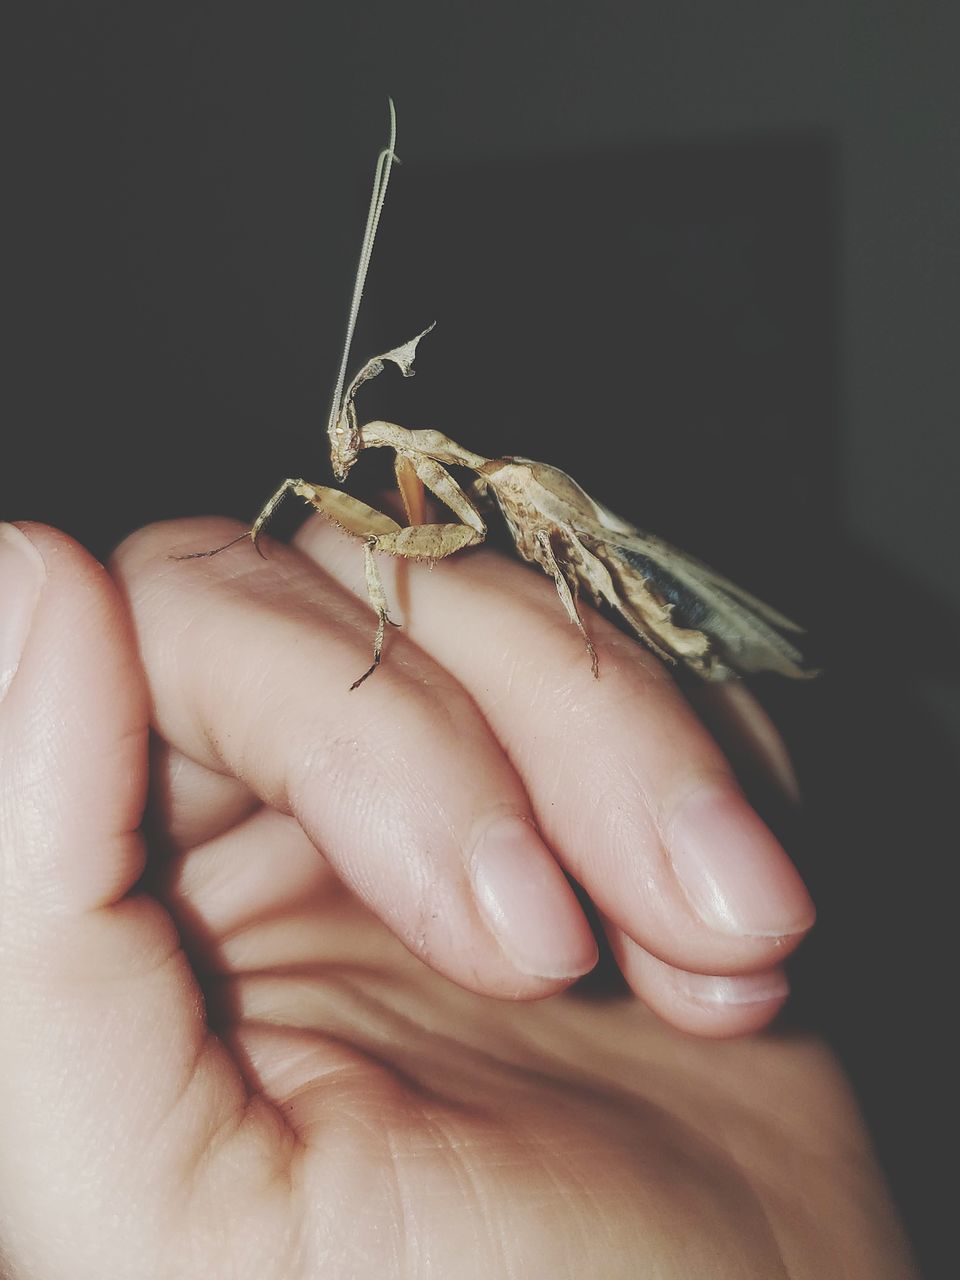 CLOSE-UP OF A HAND HOLDING SMALL INSECT